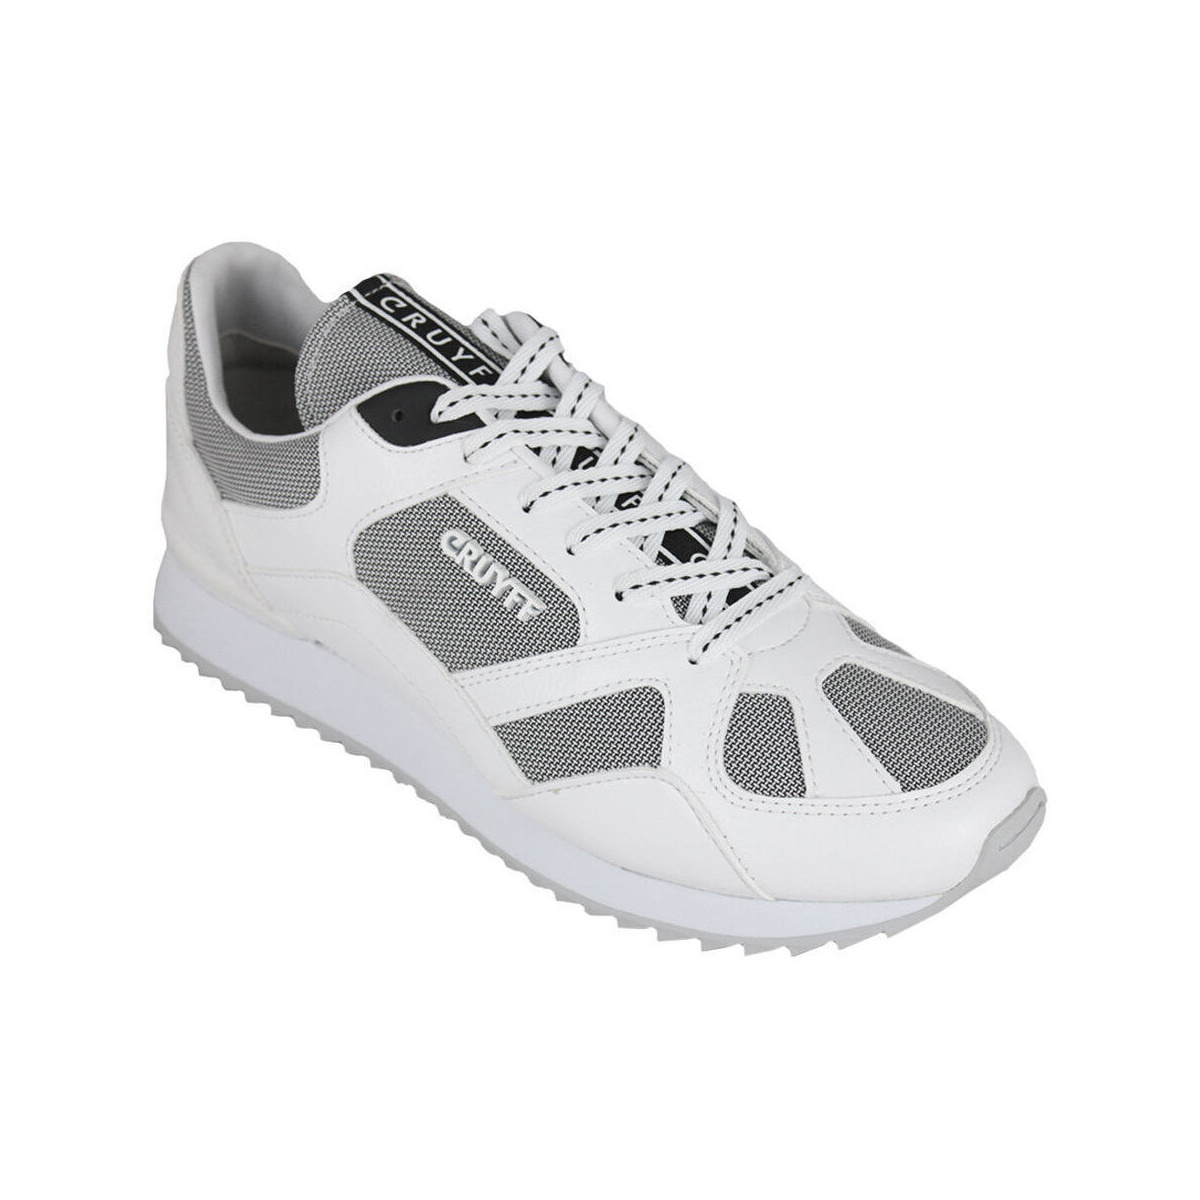 Spartoo Men's Sneakers in White by Cruyff GOOFASH